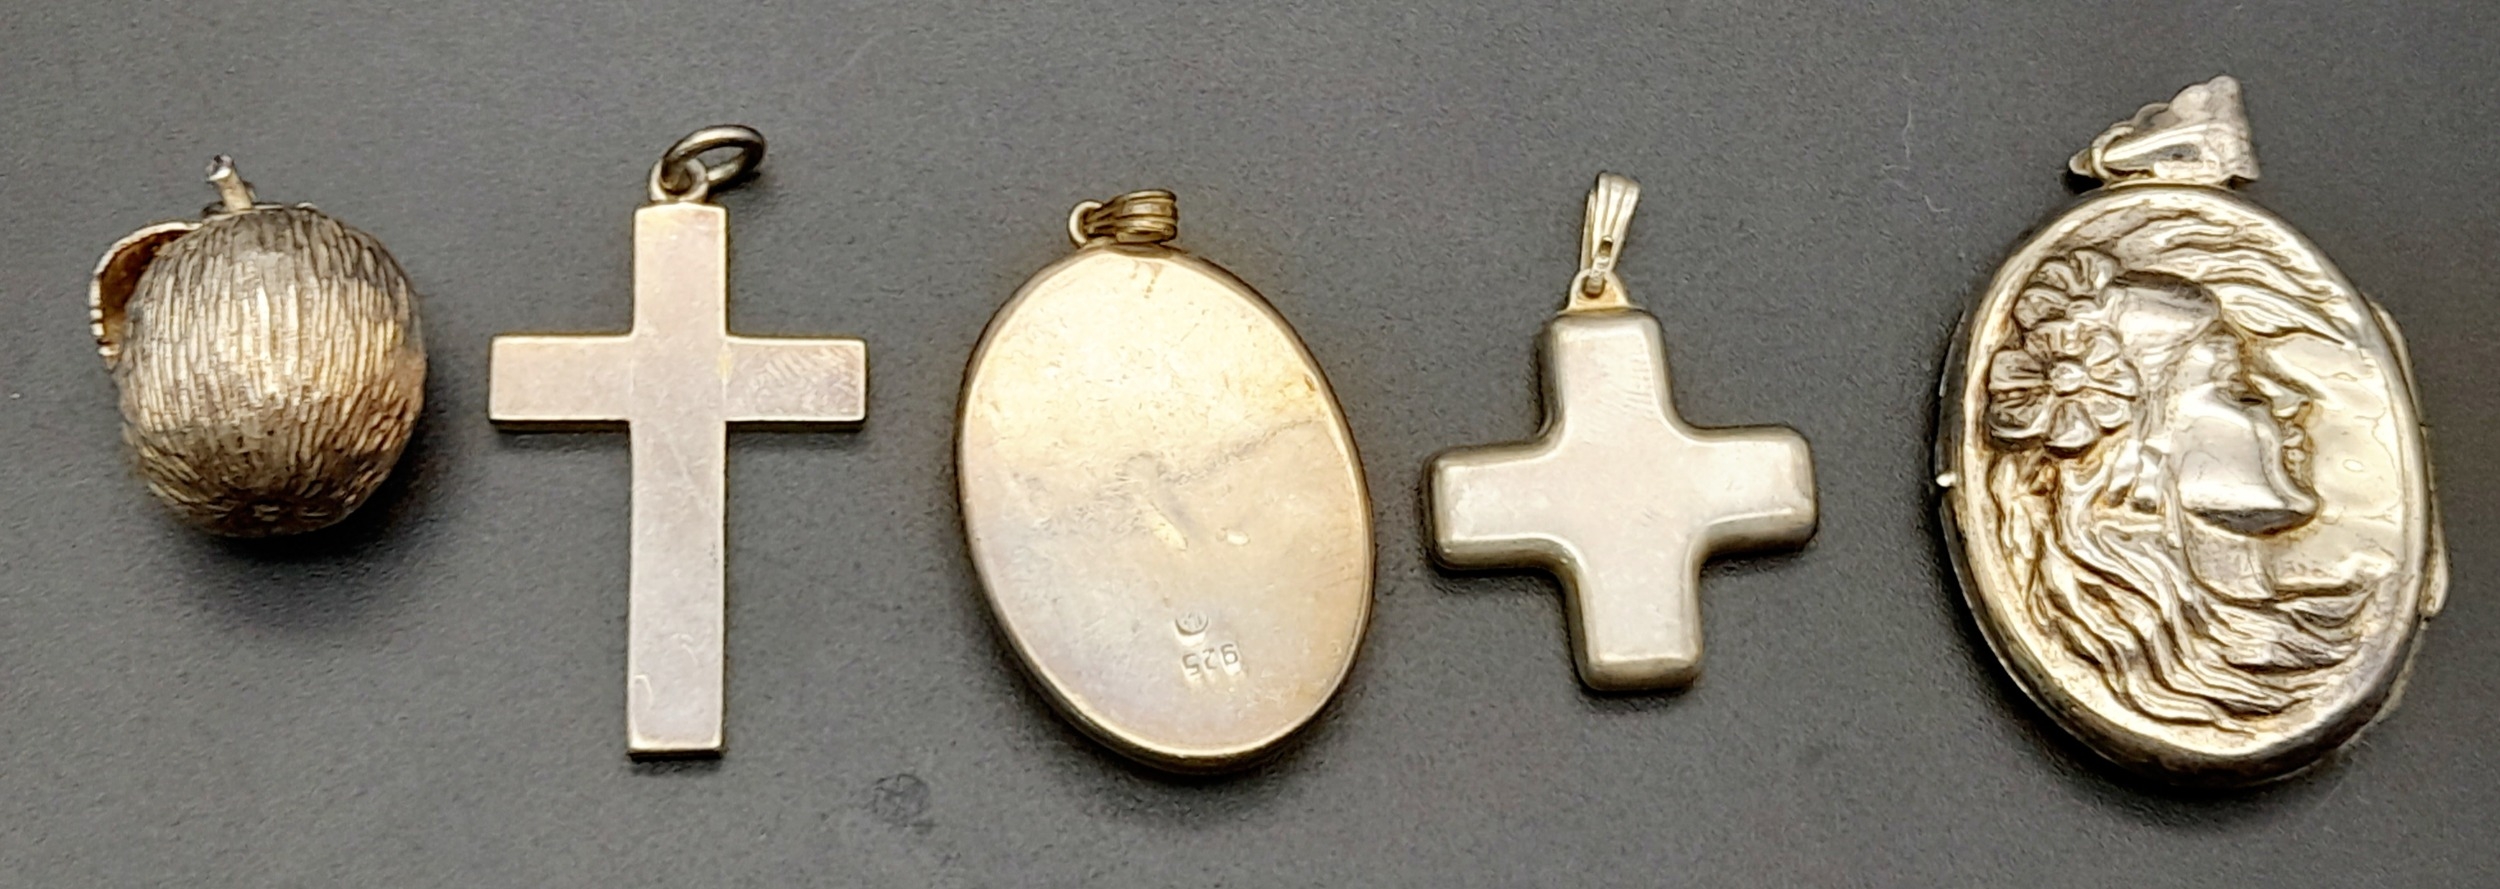 Five Different Style 925 Silver Pendants. Largest pendant, locket - 4.5cm. 45g total weight - Image 3 of 4